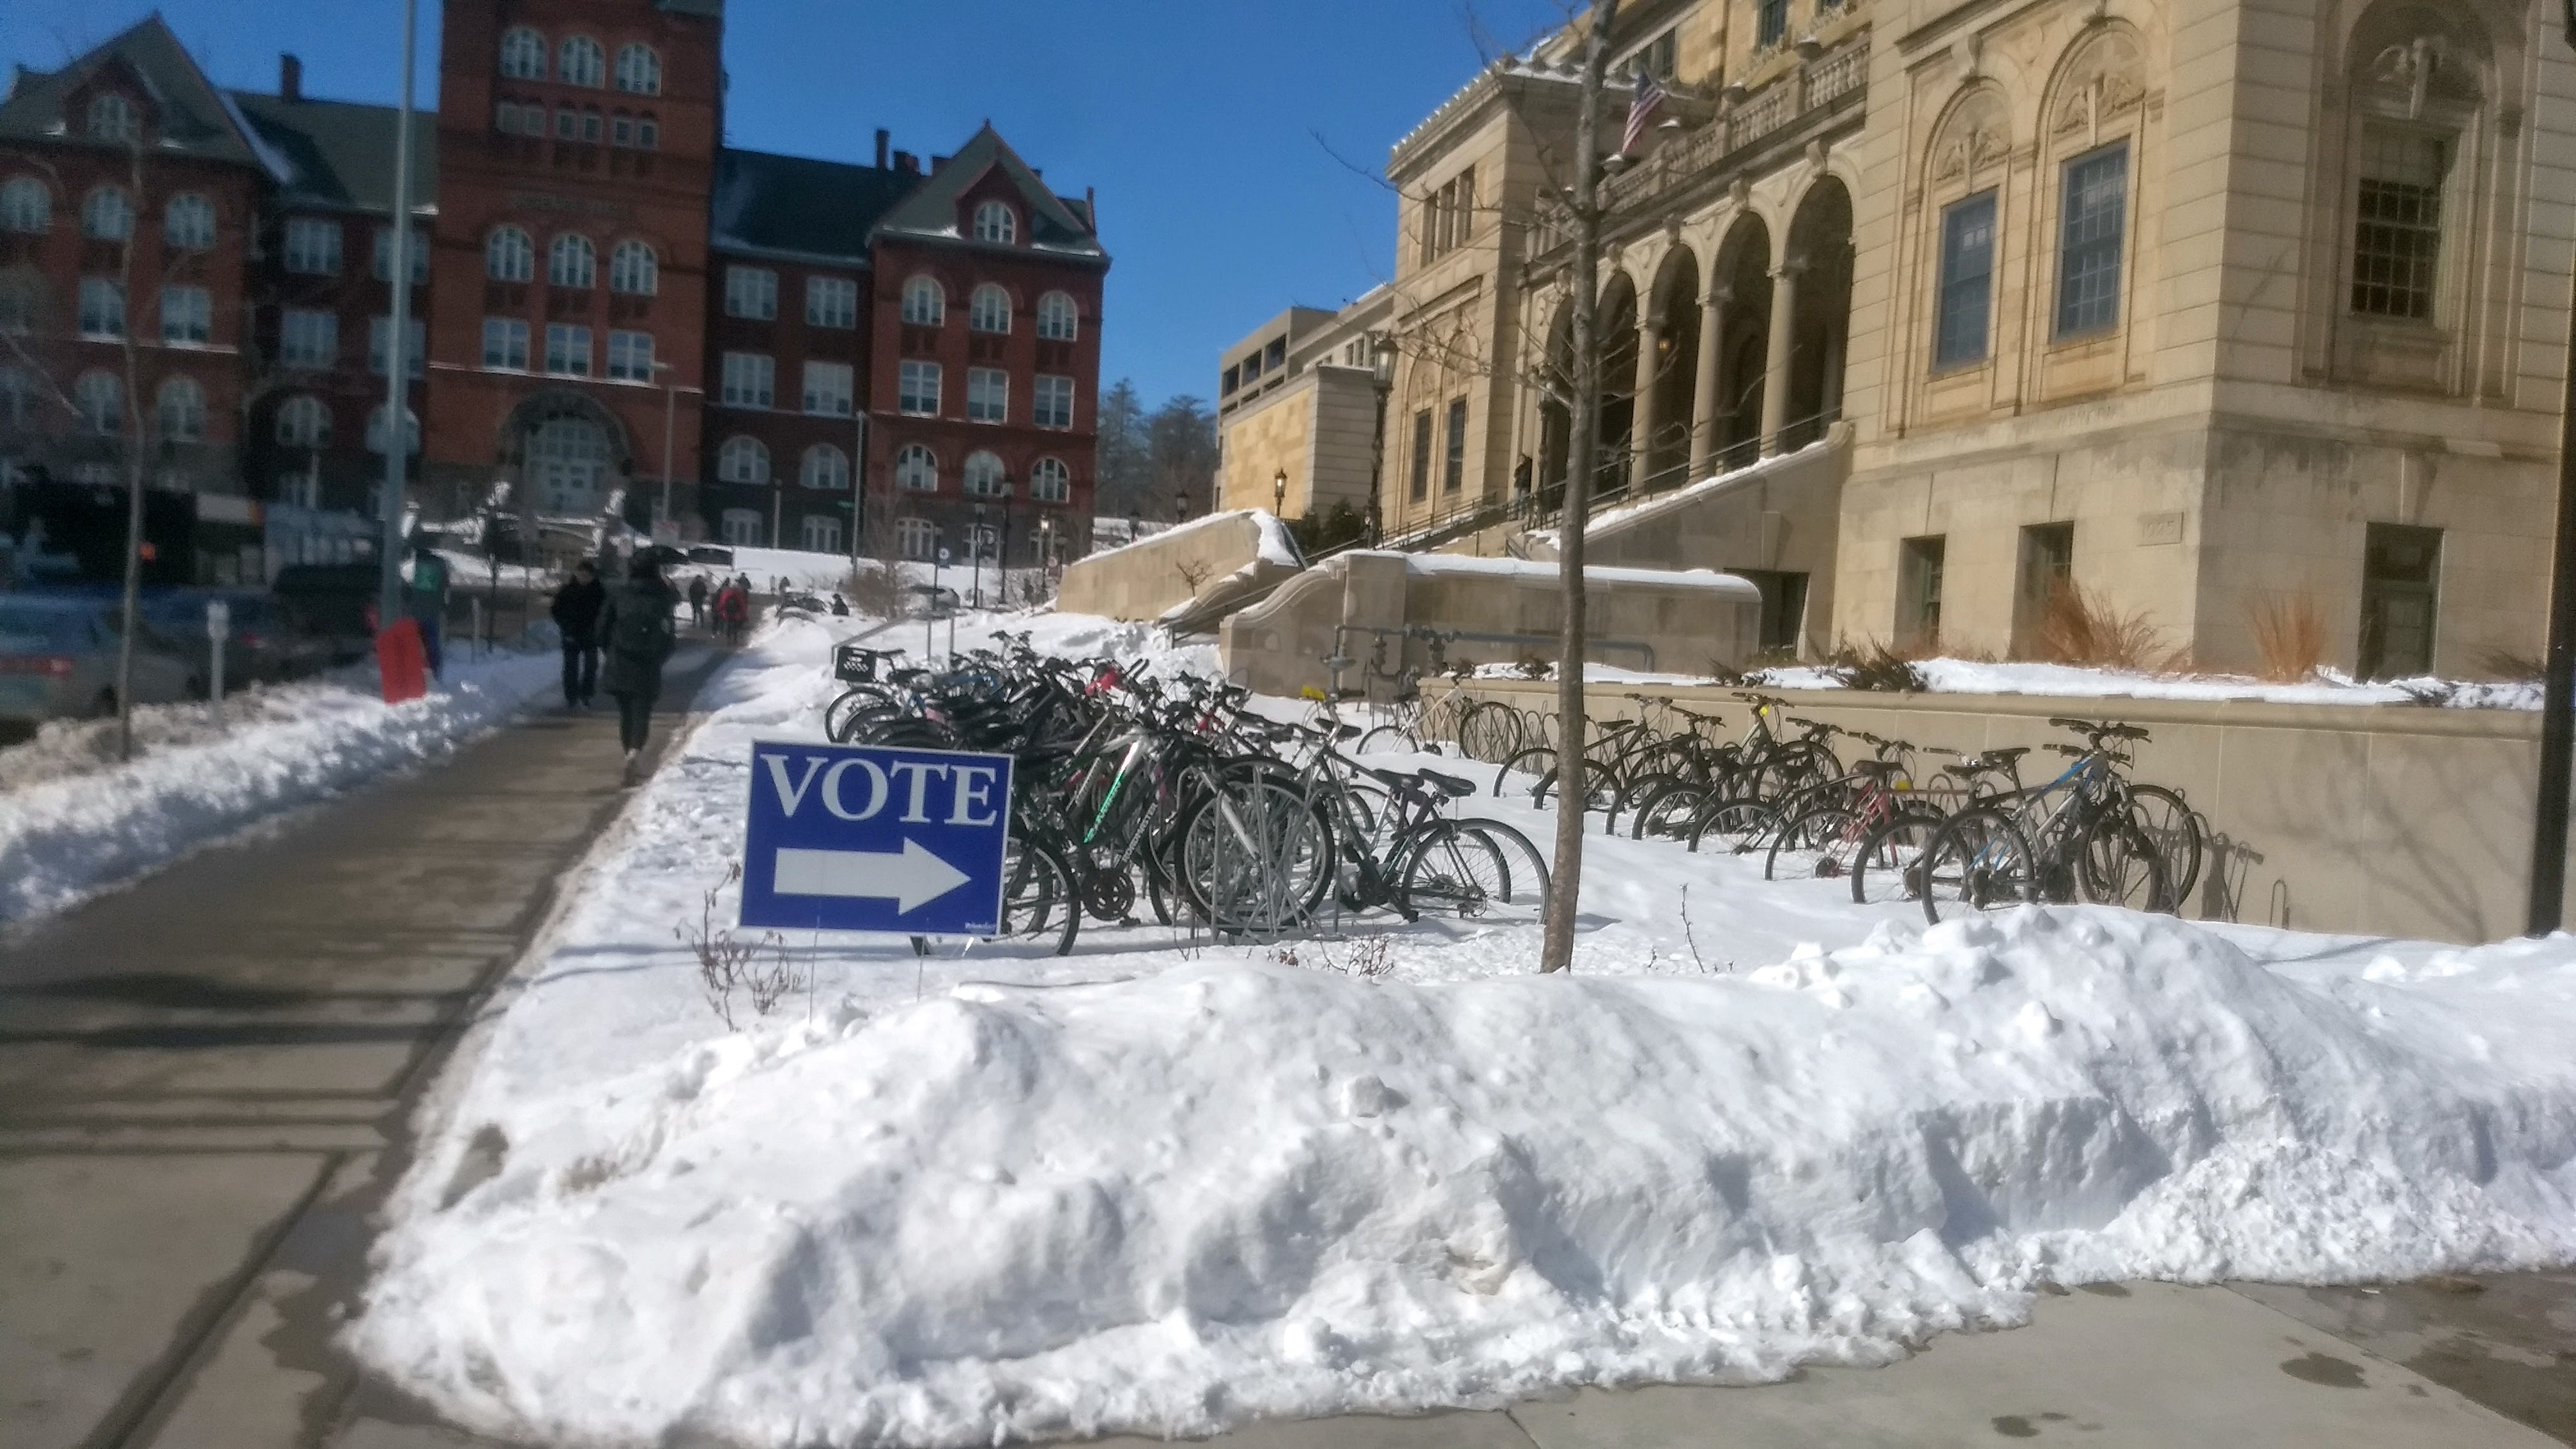 A blue yard sign saying “Vote” with an arrow pointing right in front of Memorial Union. The arrow appears to be pointing at a number of bike racks covered in snow but still well occupied with bikes.